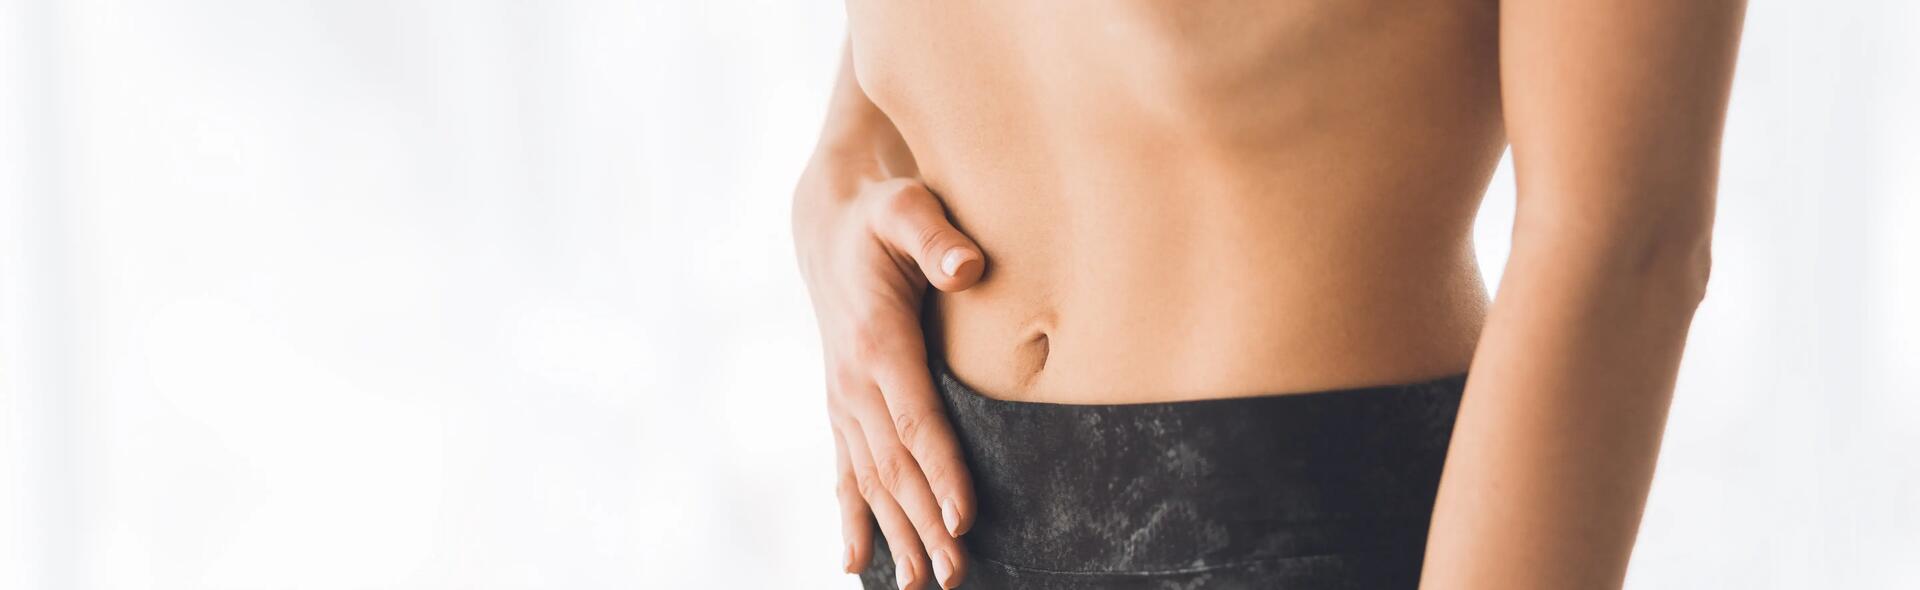 Stomach vacuuming can help you lose 3 inches in 3 weeks. Here's everything  you need to know | HealthShots